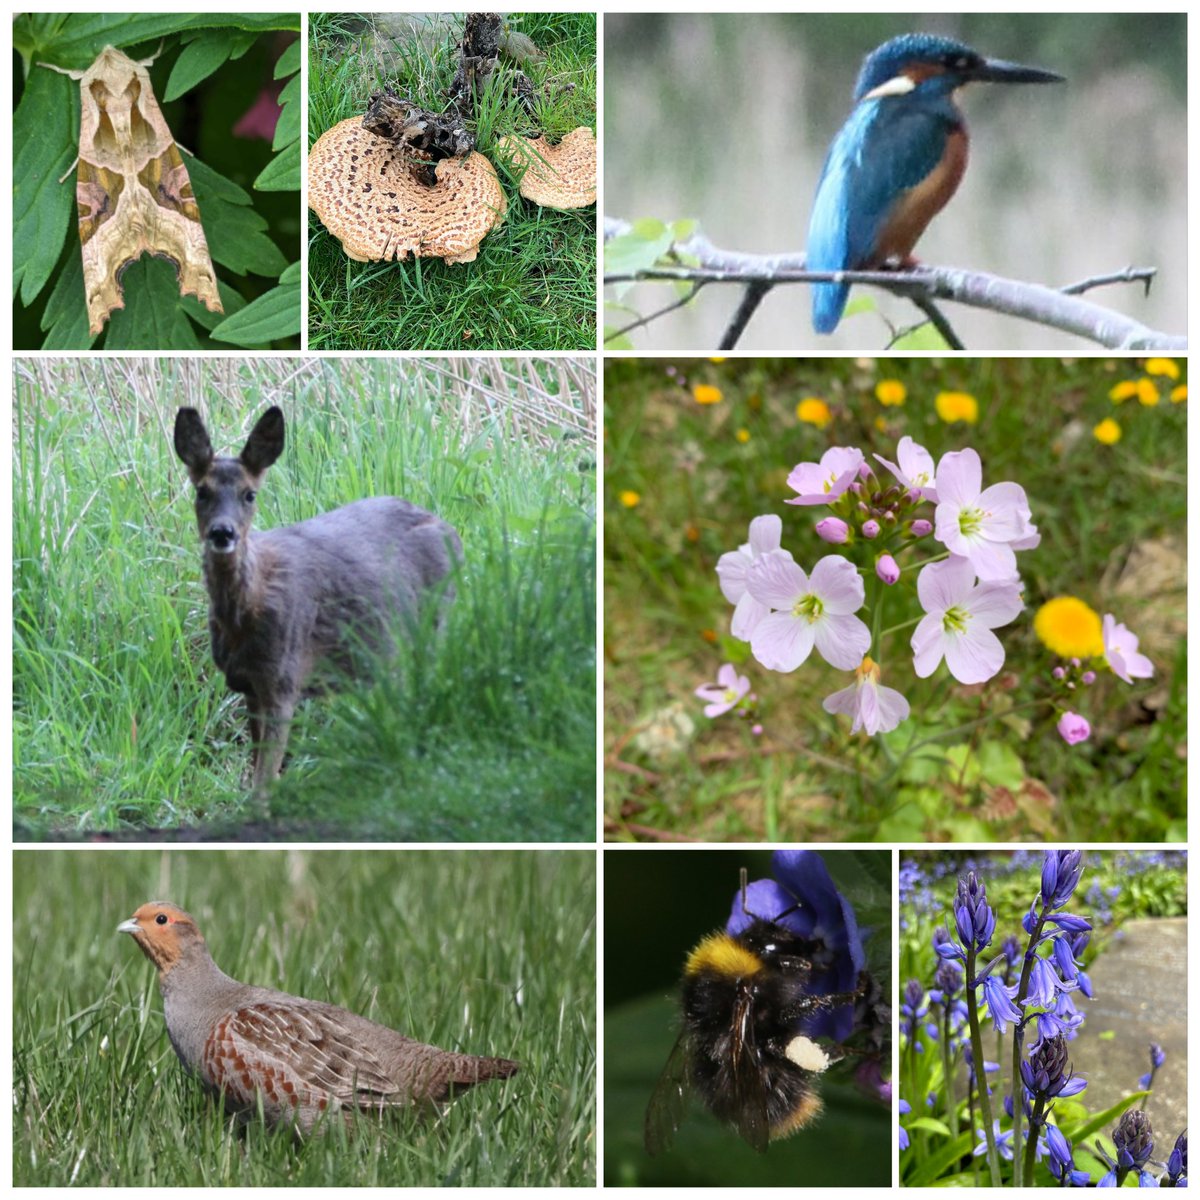 Wow, amazing to see 145 people sharing wildlife sightings across #GosforthsWildWeb. Thank you all so much! 🤯🔎 From Roe Deer and Kingfishers to beautiful flowers, you've been noticing SO MUCH nature across the city. Enjoy a few recent highlights... ow.ly/IWEk50Ryc9U